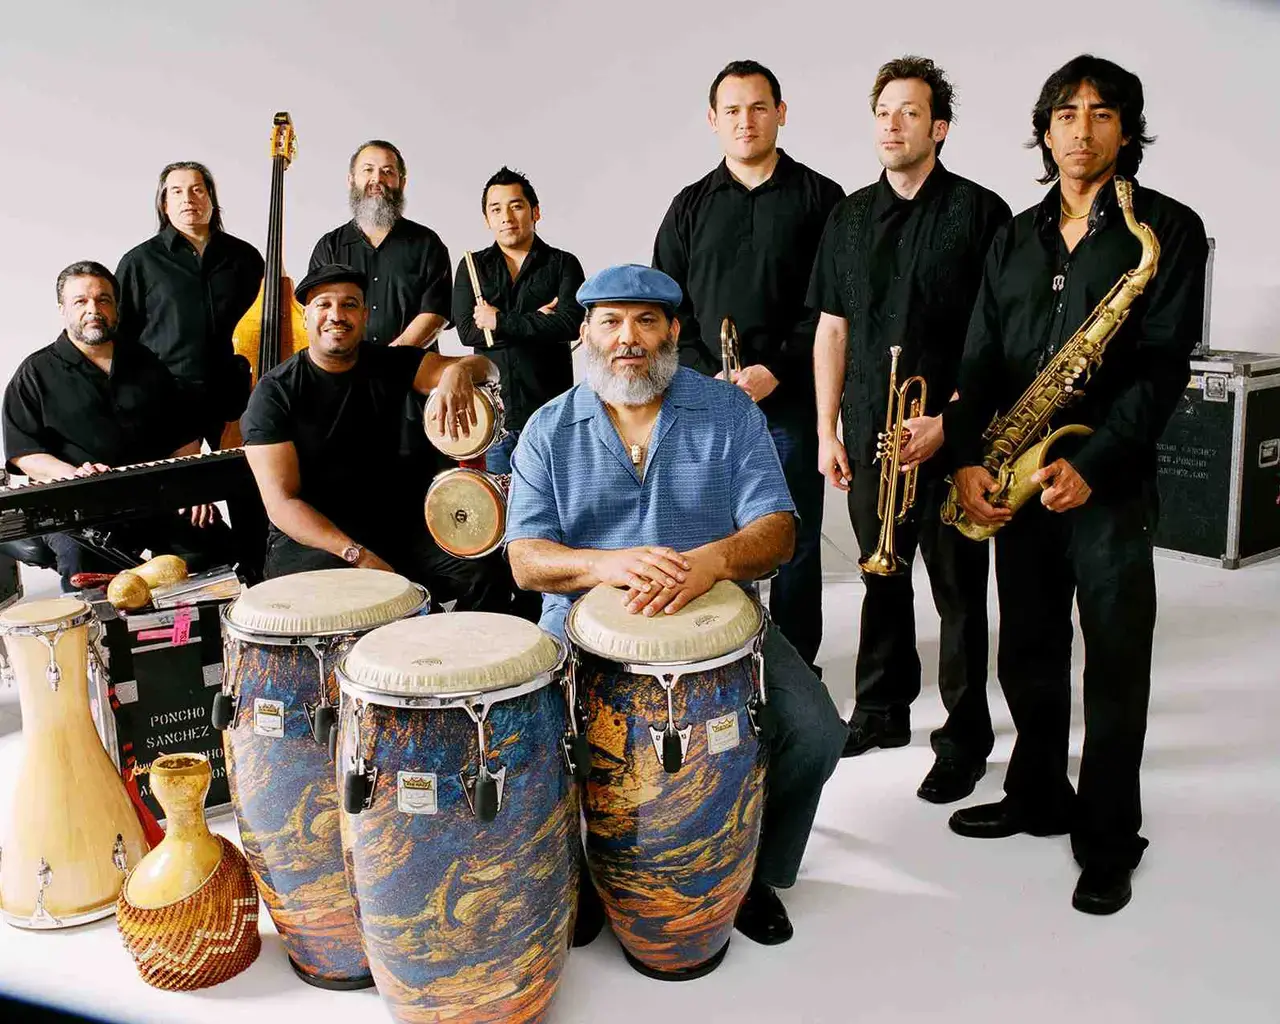 Poncho Sanchez and band. Image courtesy of Montgomery County Community College.